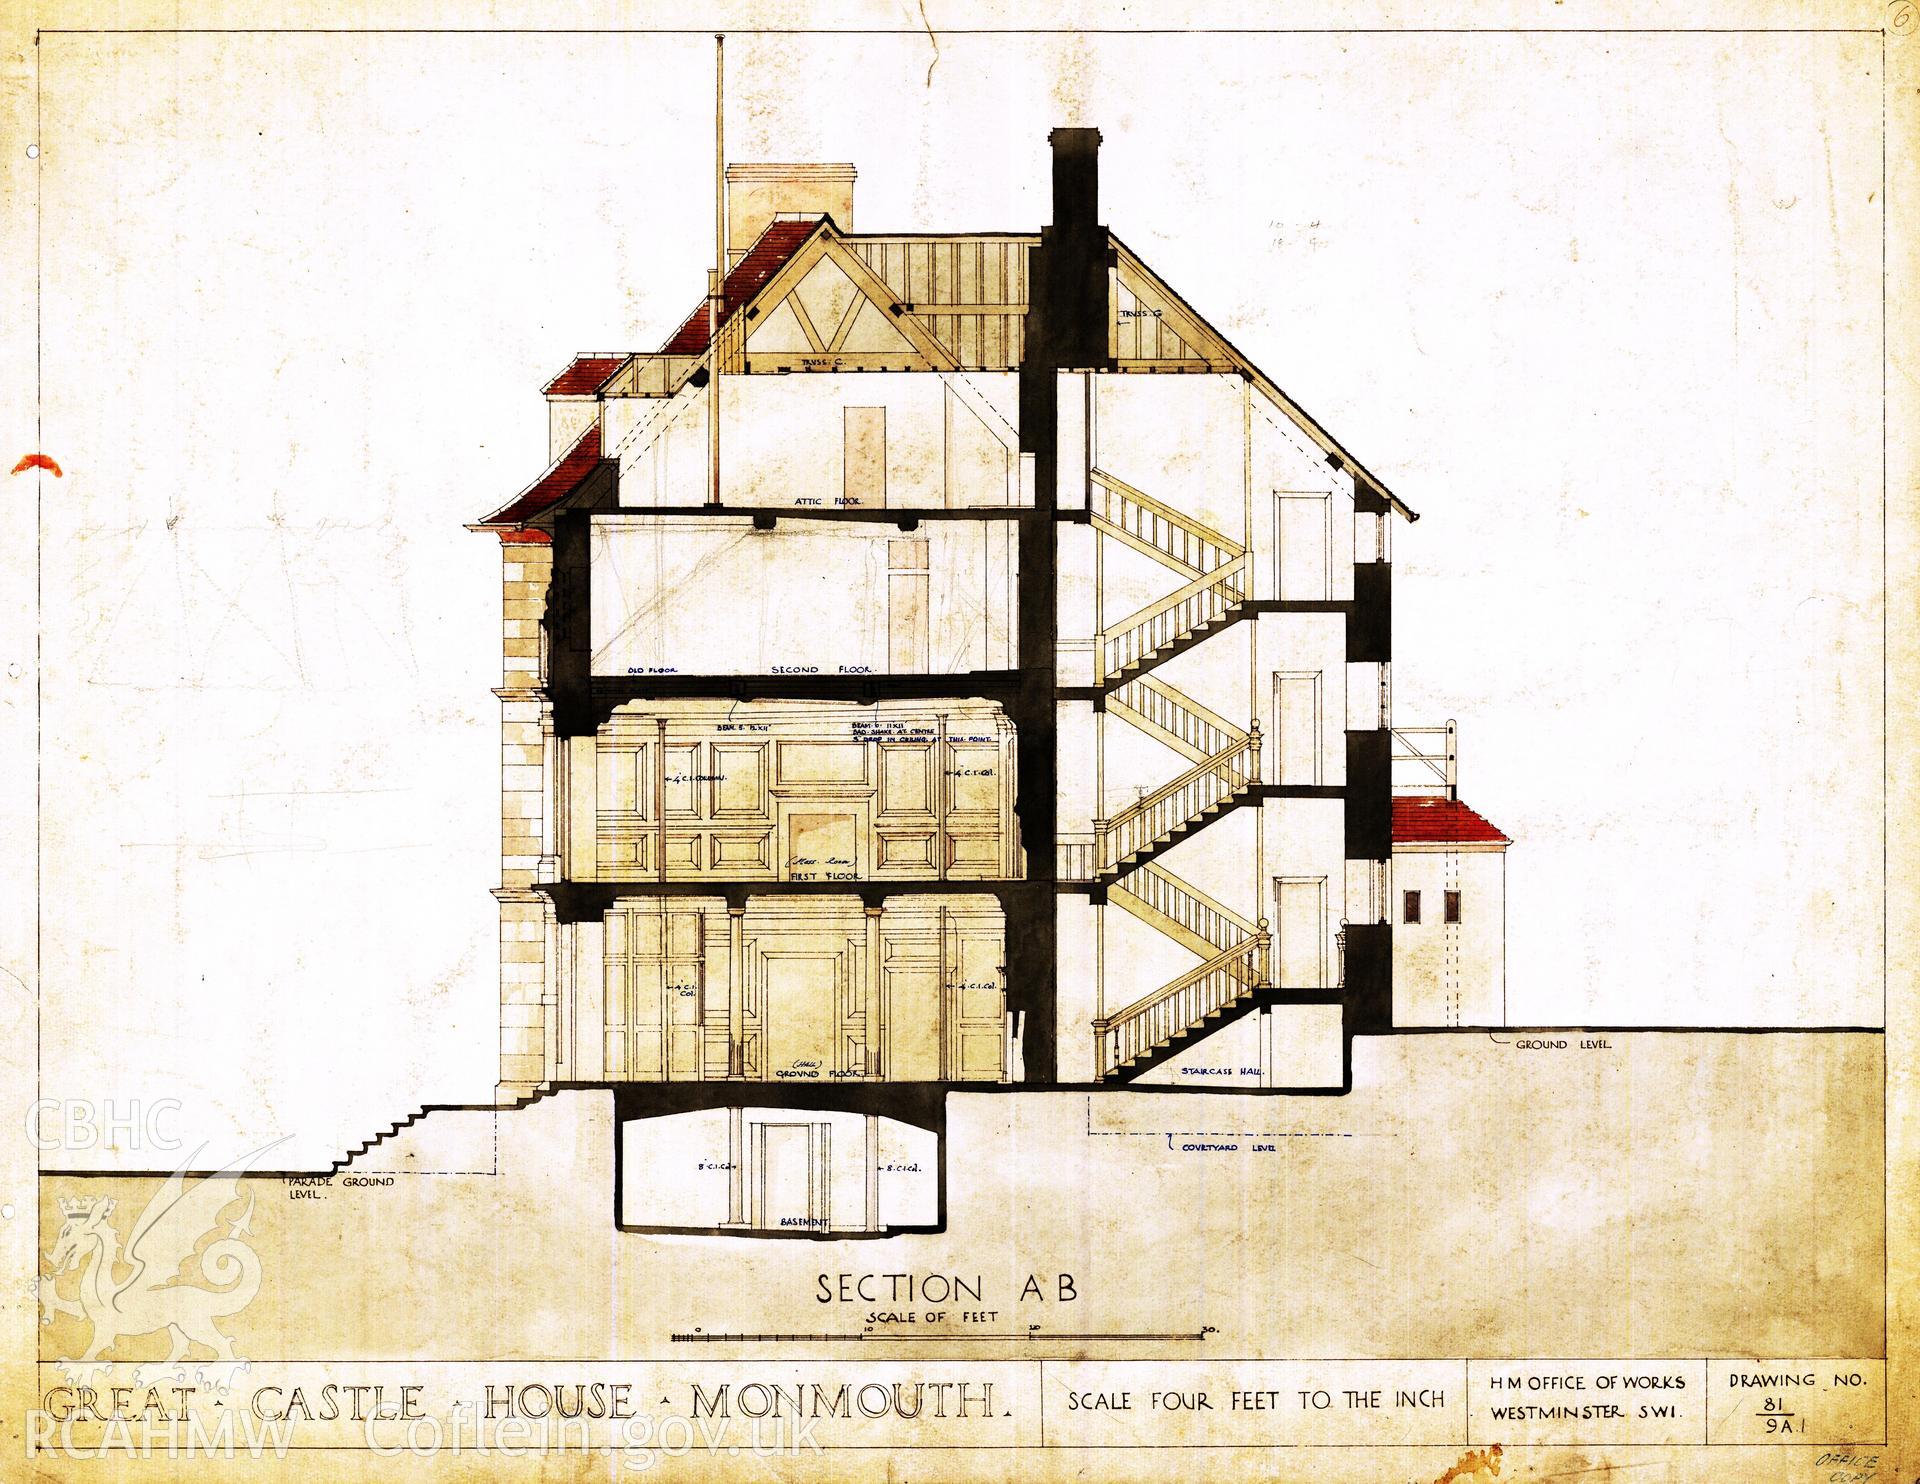 Cadw guardianship monument drawing of Monmouth Great Castle House. Section A-B. Cadw Ref. No:81/9A1. Scale 1:48.